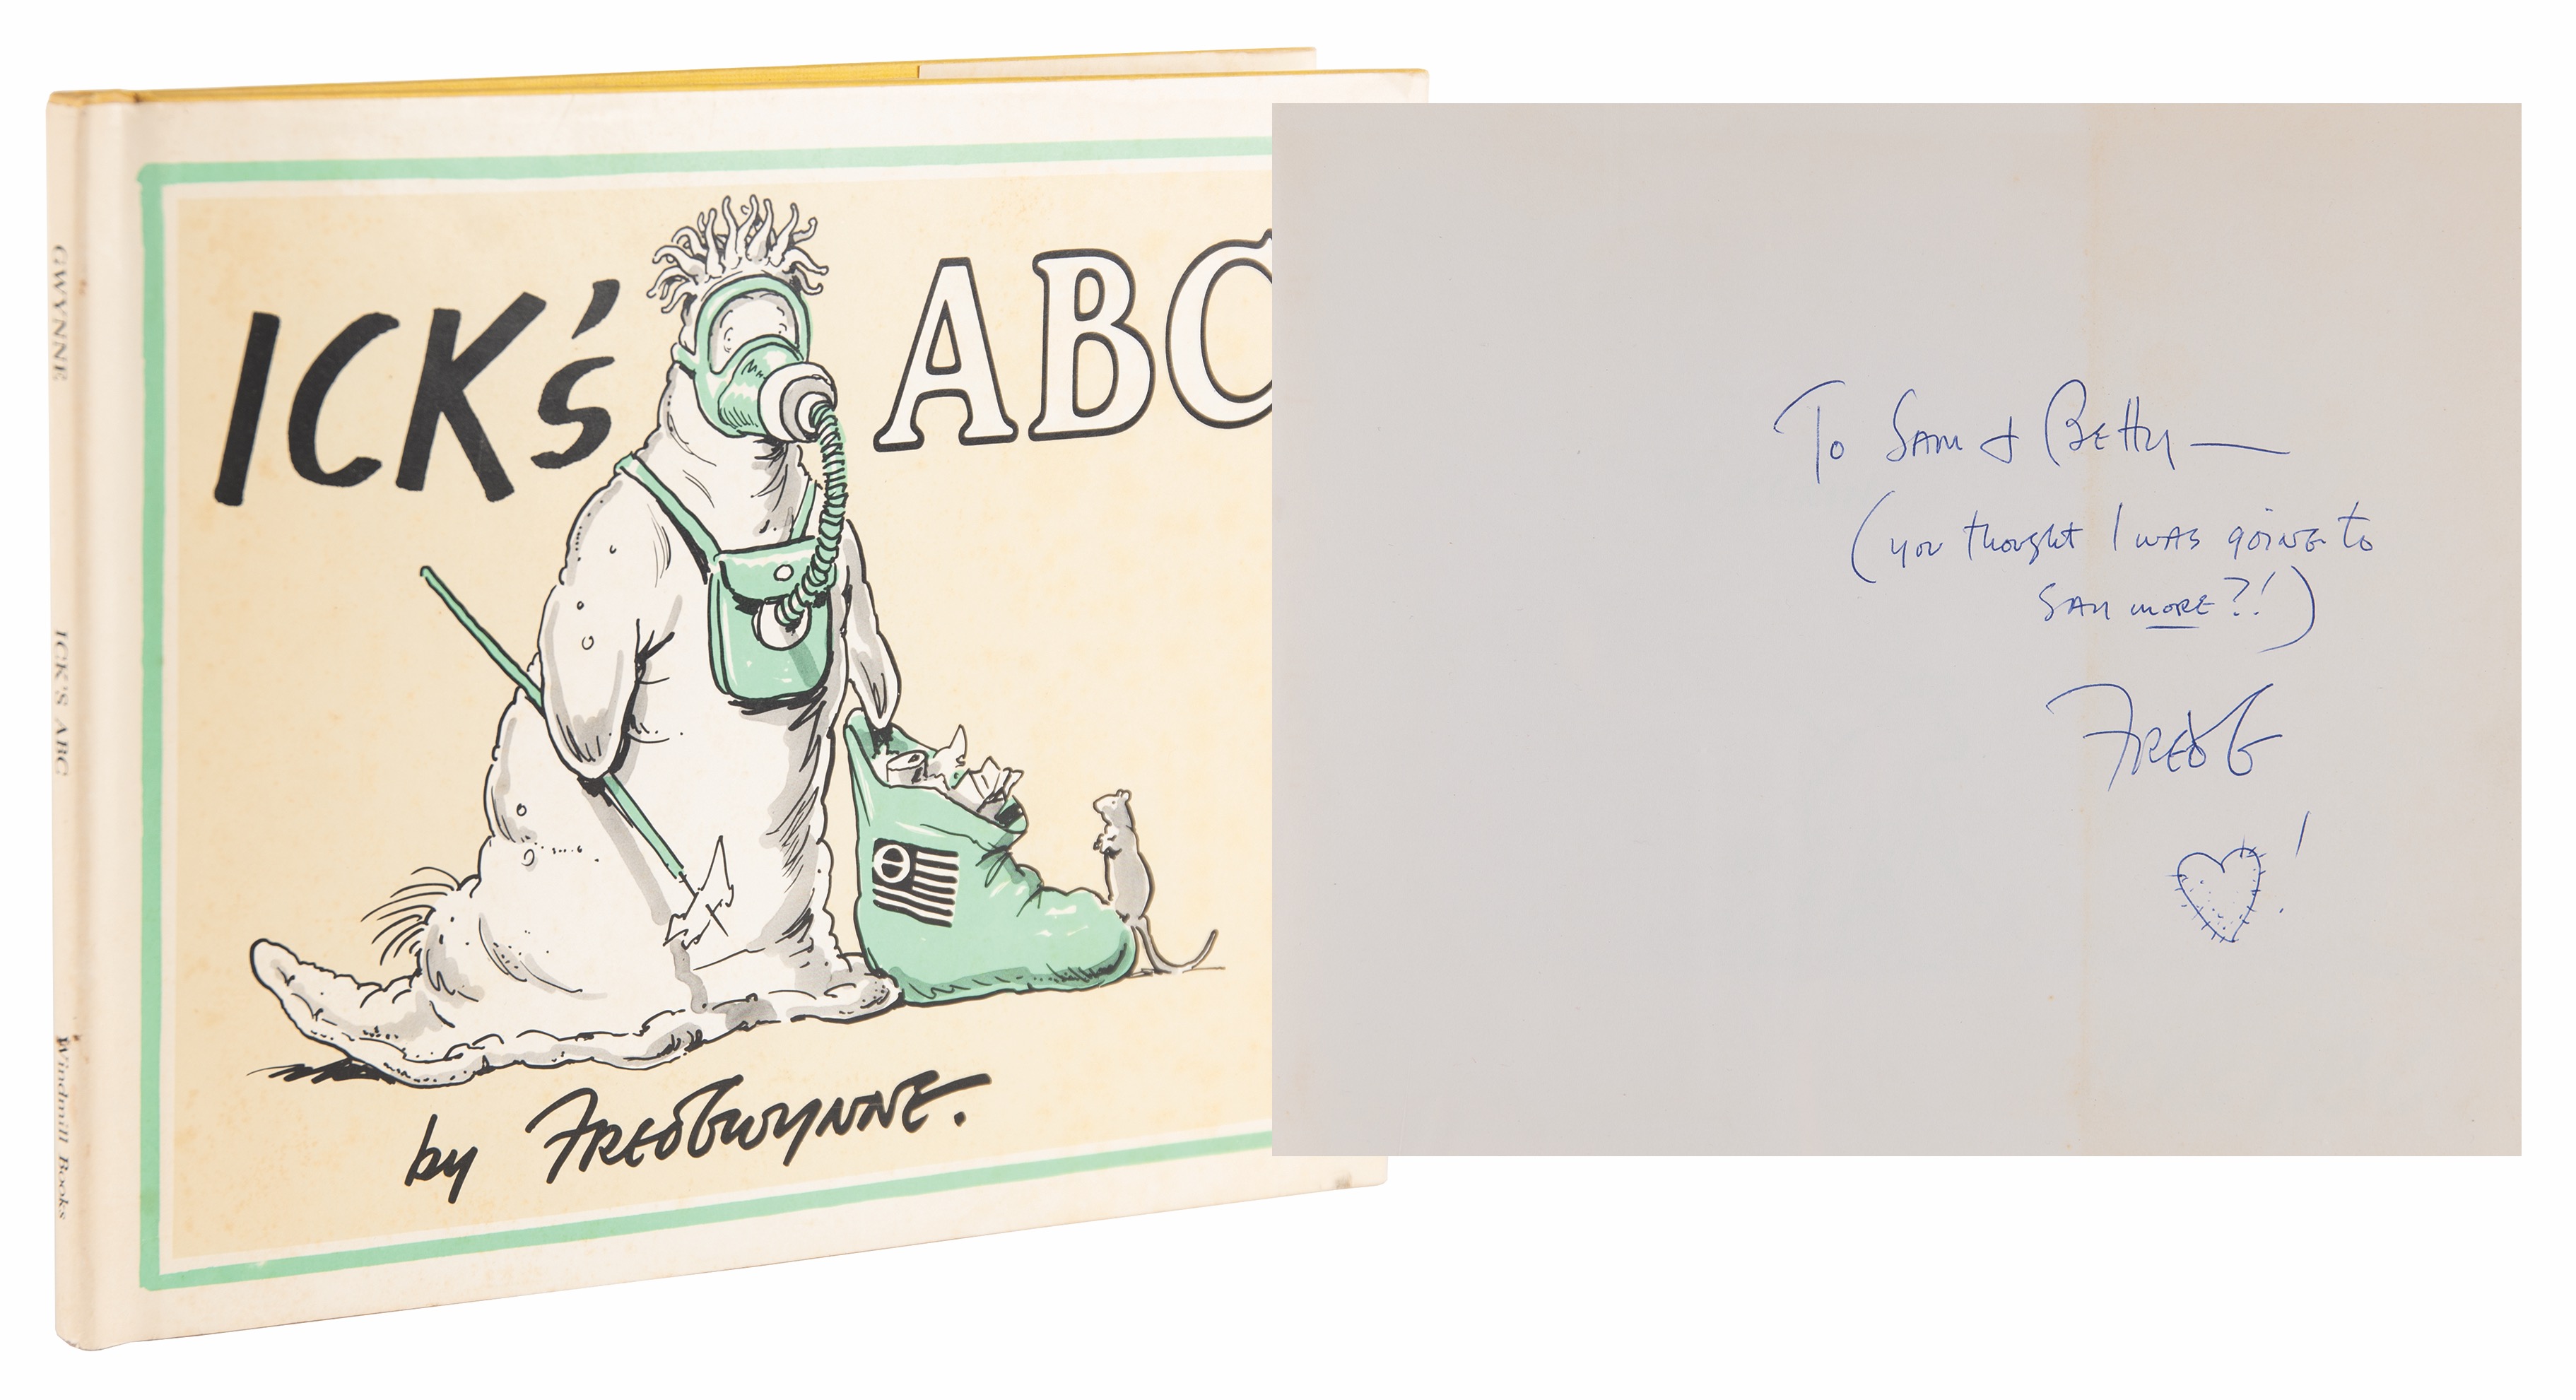 Lot #808 Fred Gwynne Signed Book - Ick's ABC